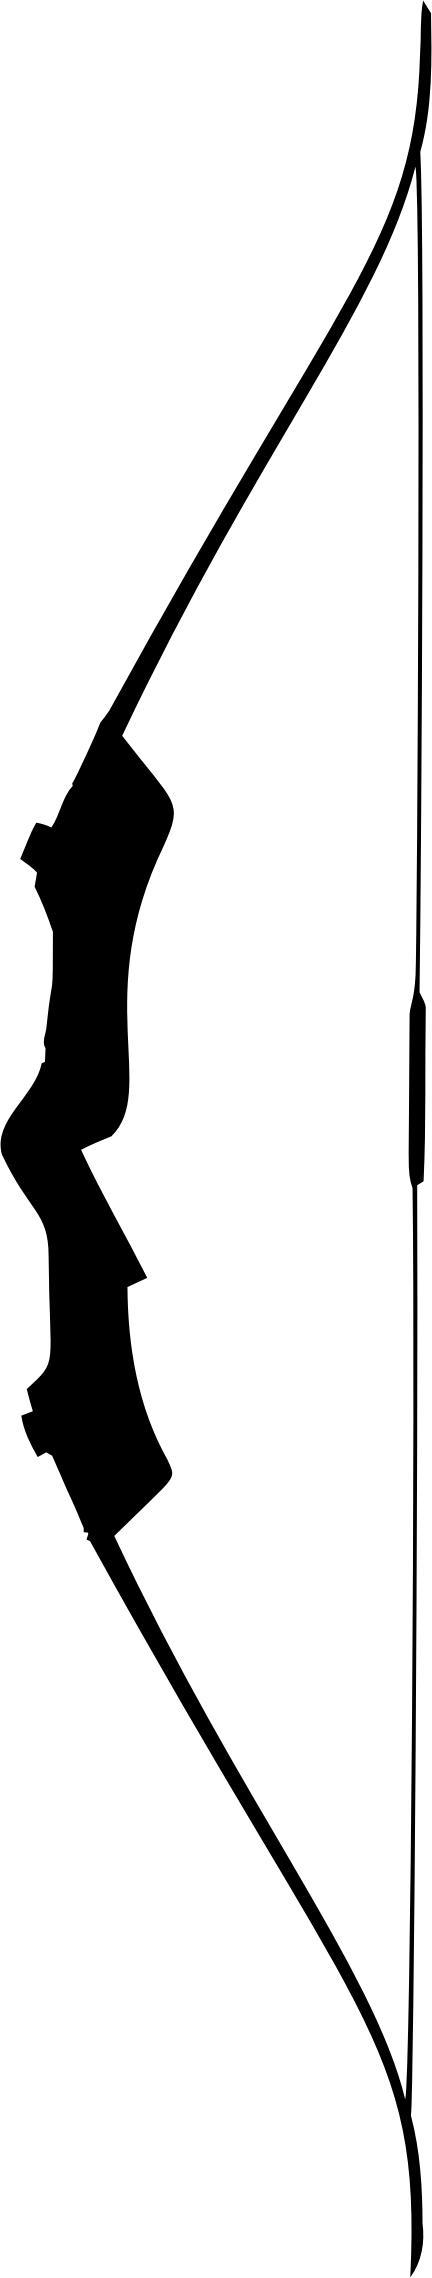 Bow Silhouette png transparent